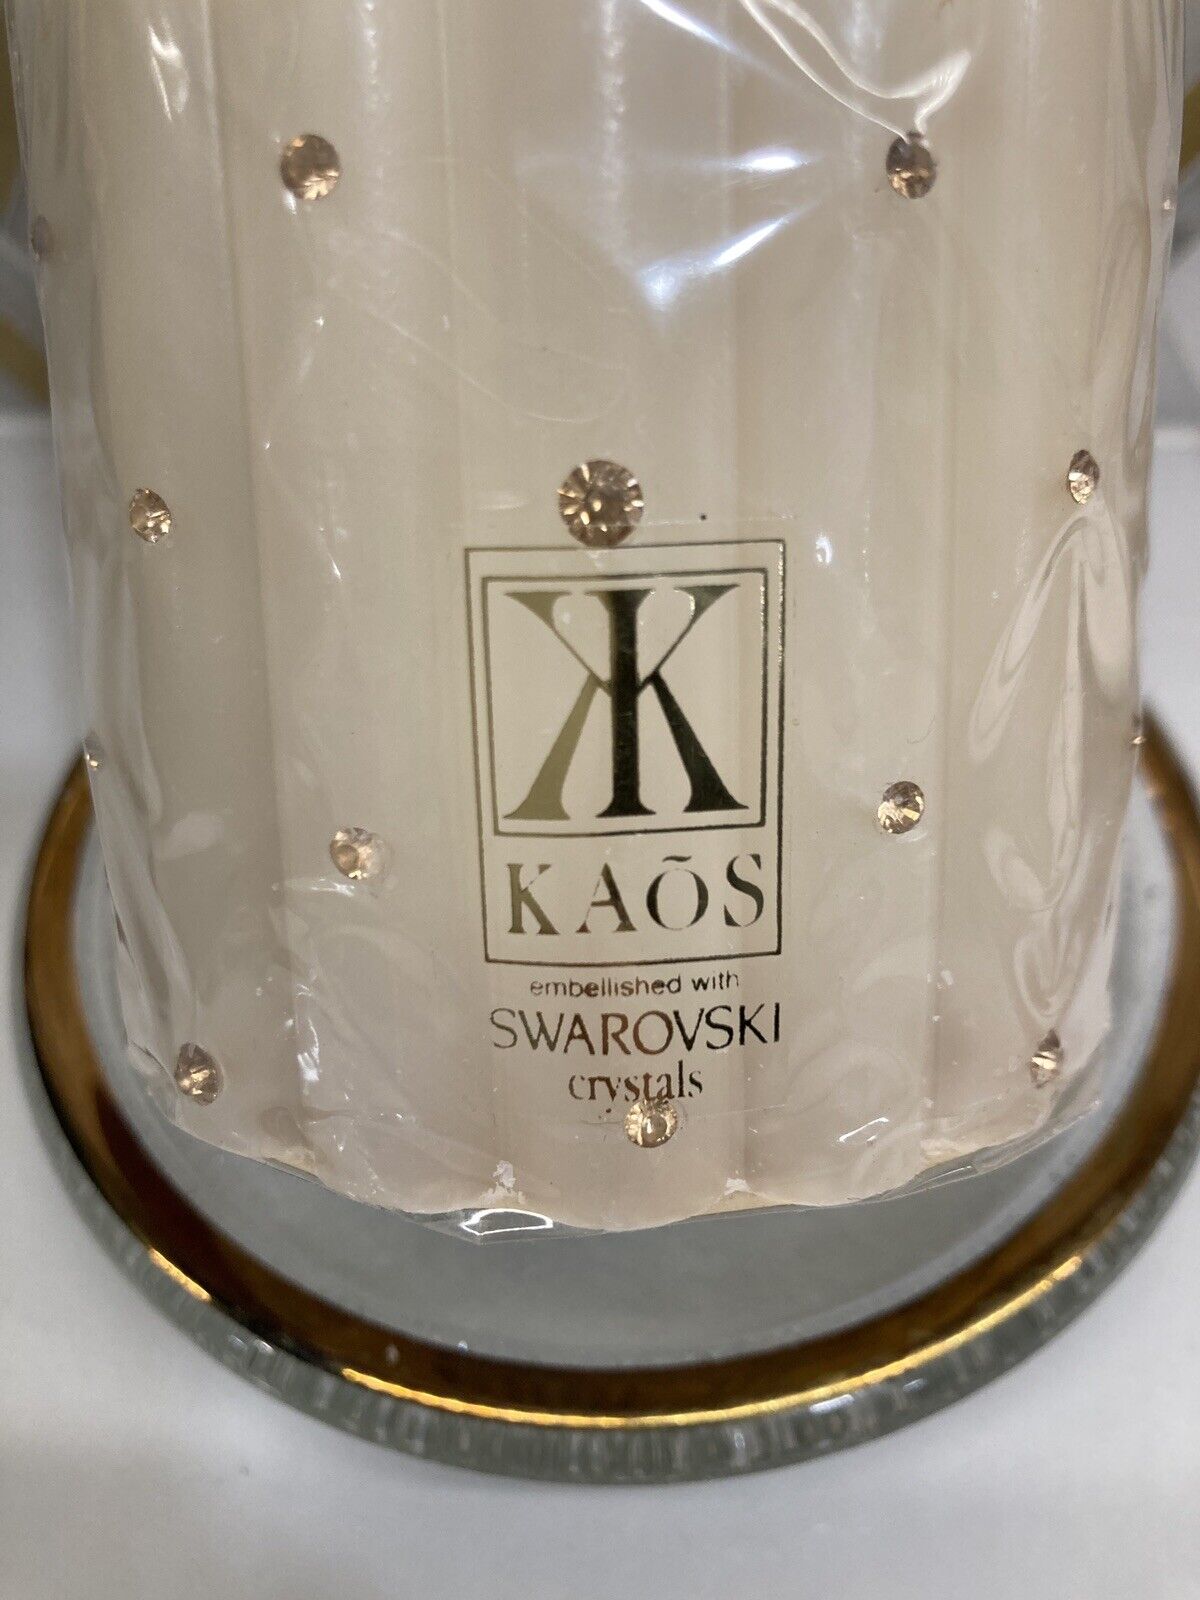 Kaos Embellished Swarovski Crystals Pillar Candle with Gold-rimmed Candle Plate